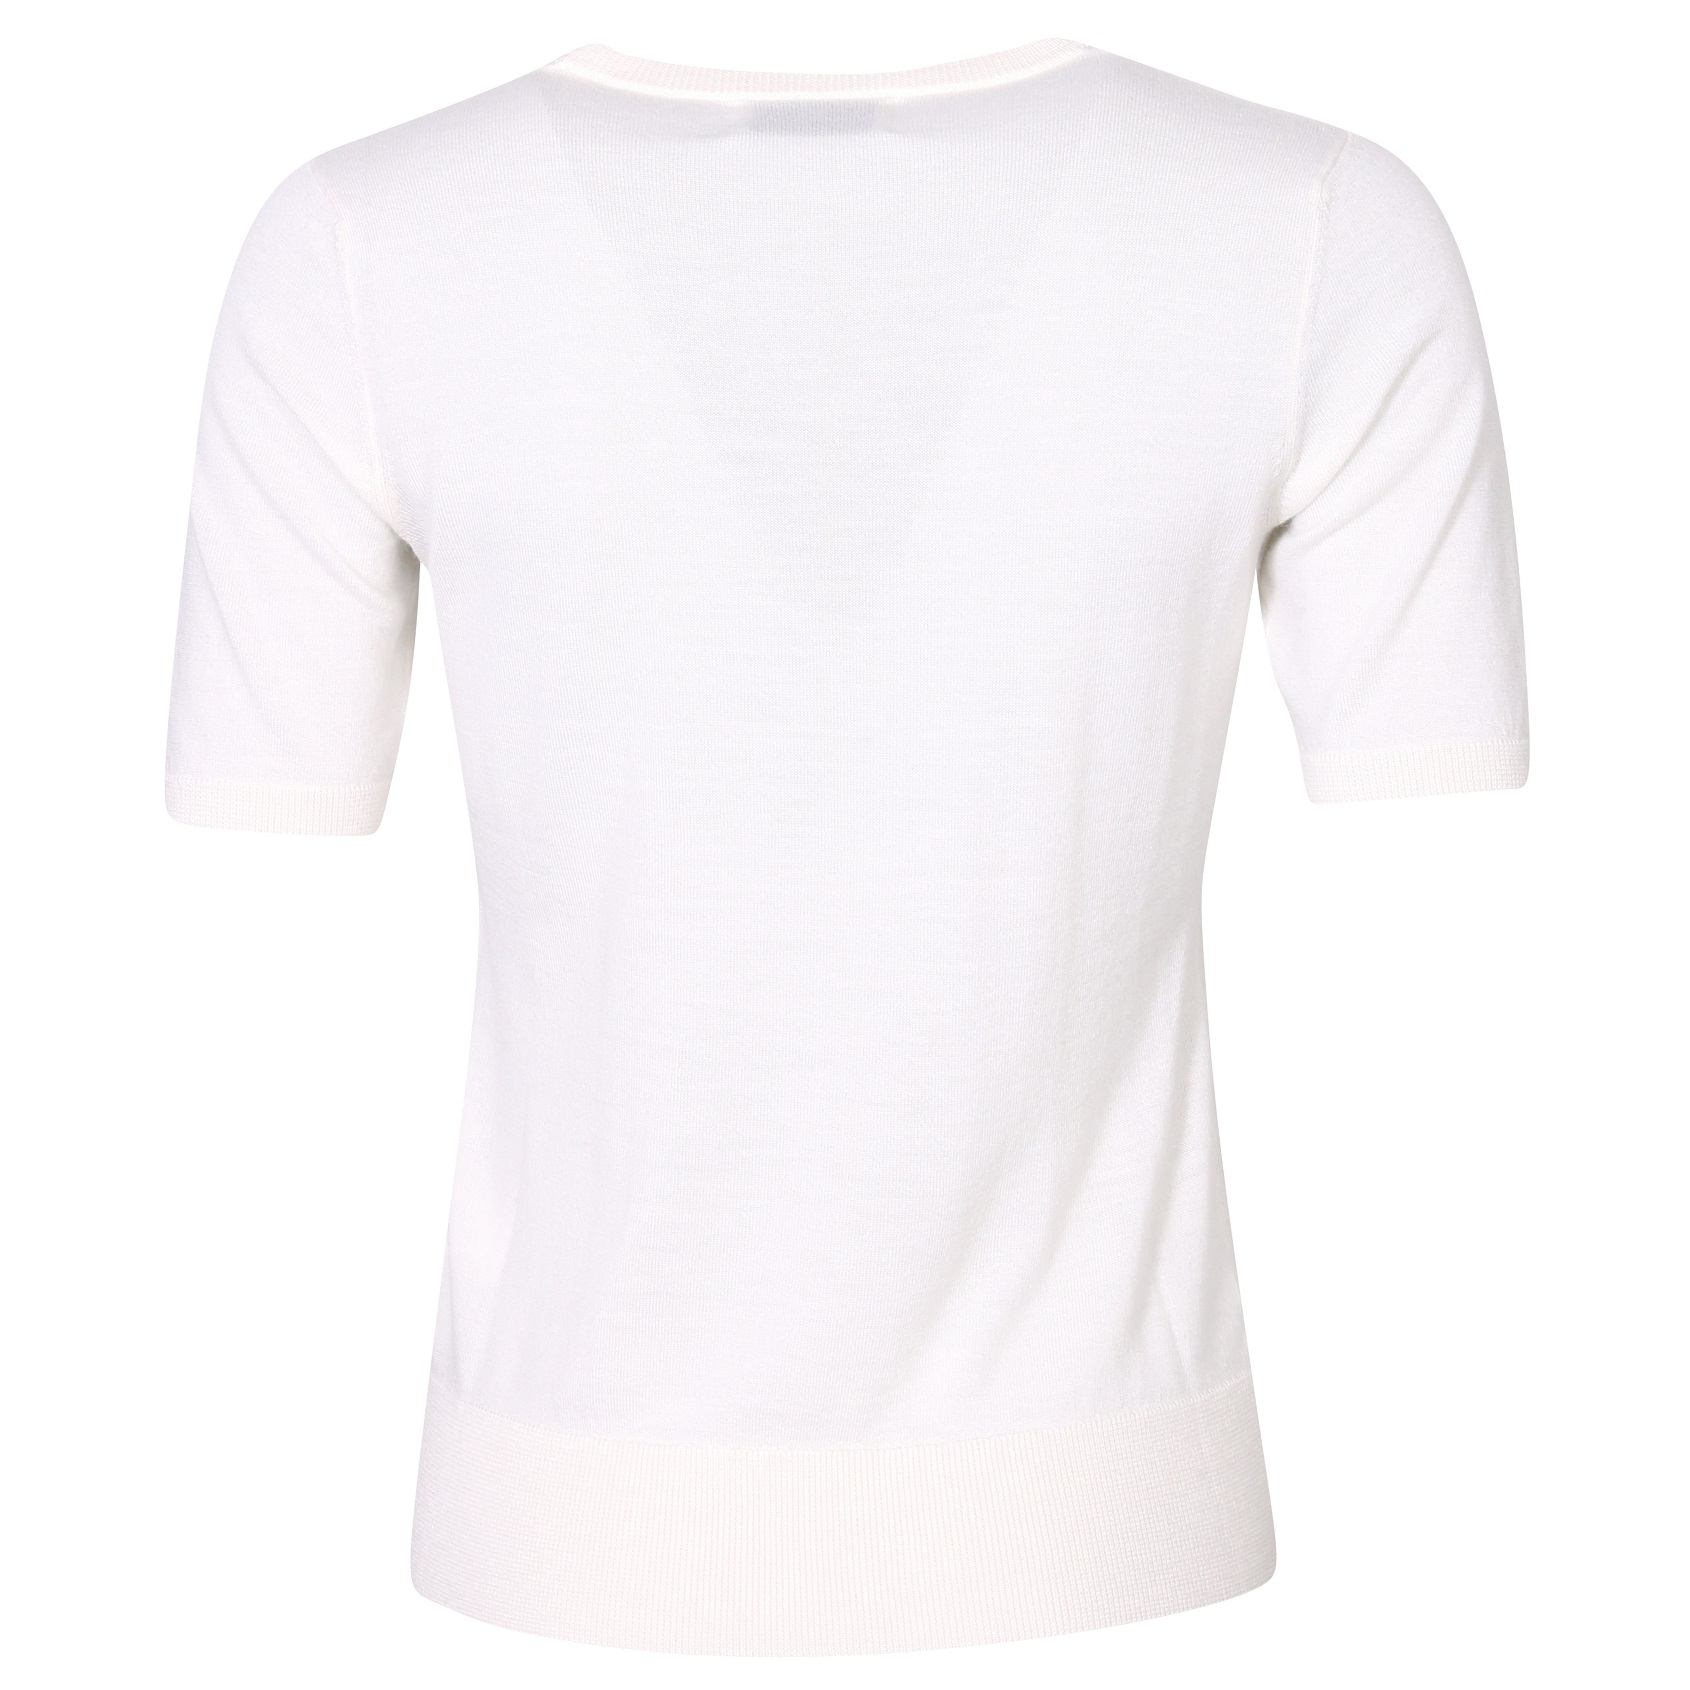 FLONA Cashmere T-Shirt in Off White L